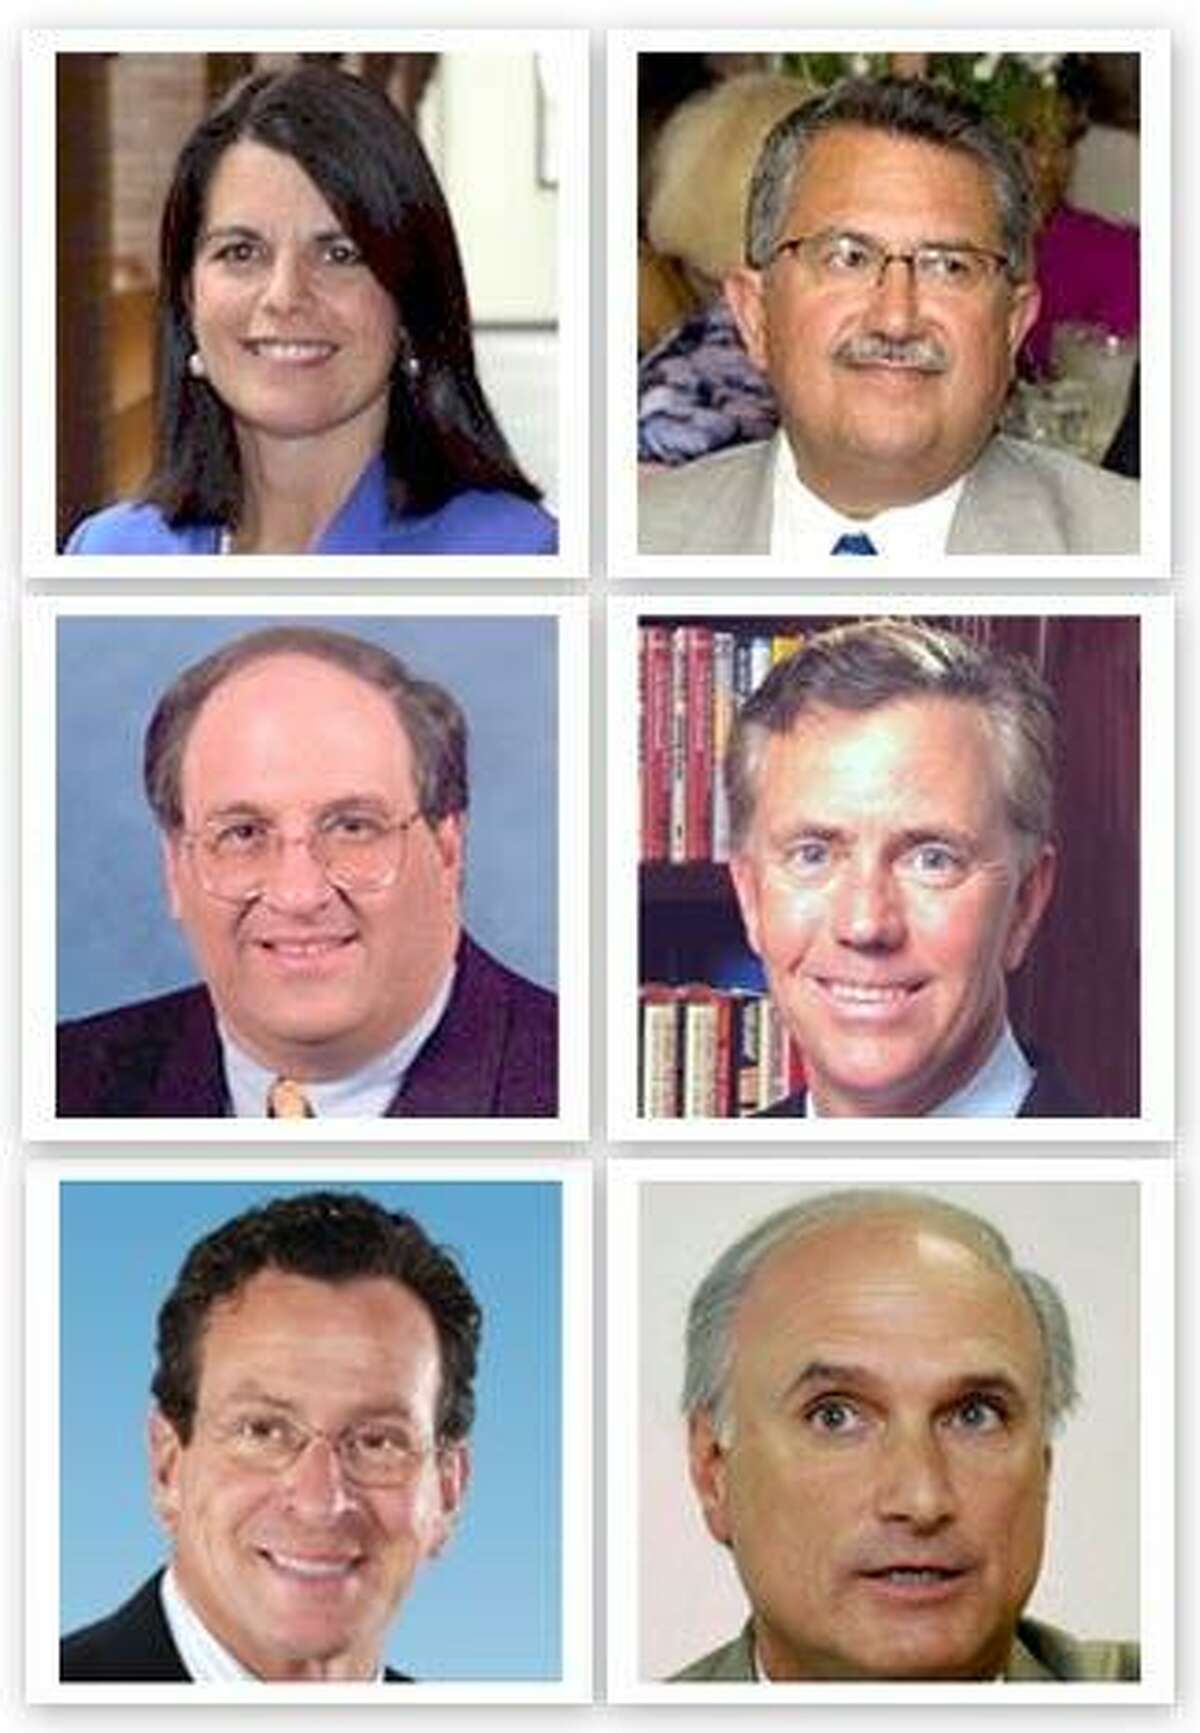 Clockwise, from top left, Mary Glassman, Juan Figueroa, Ned Lamont, Rudy Marconi, Dan Malloy and Michael Jarjura will participate in an online-only debate at 7 p.m. tonight that will be broadcast live right here on RegisterCitizen.Com.